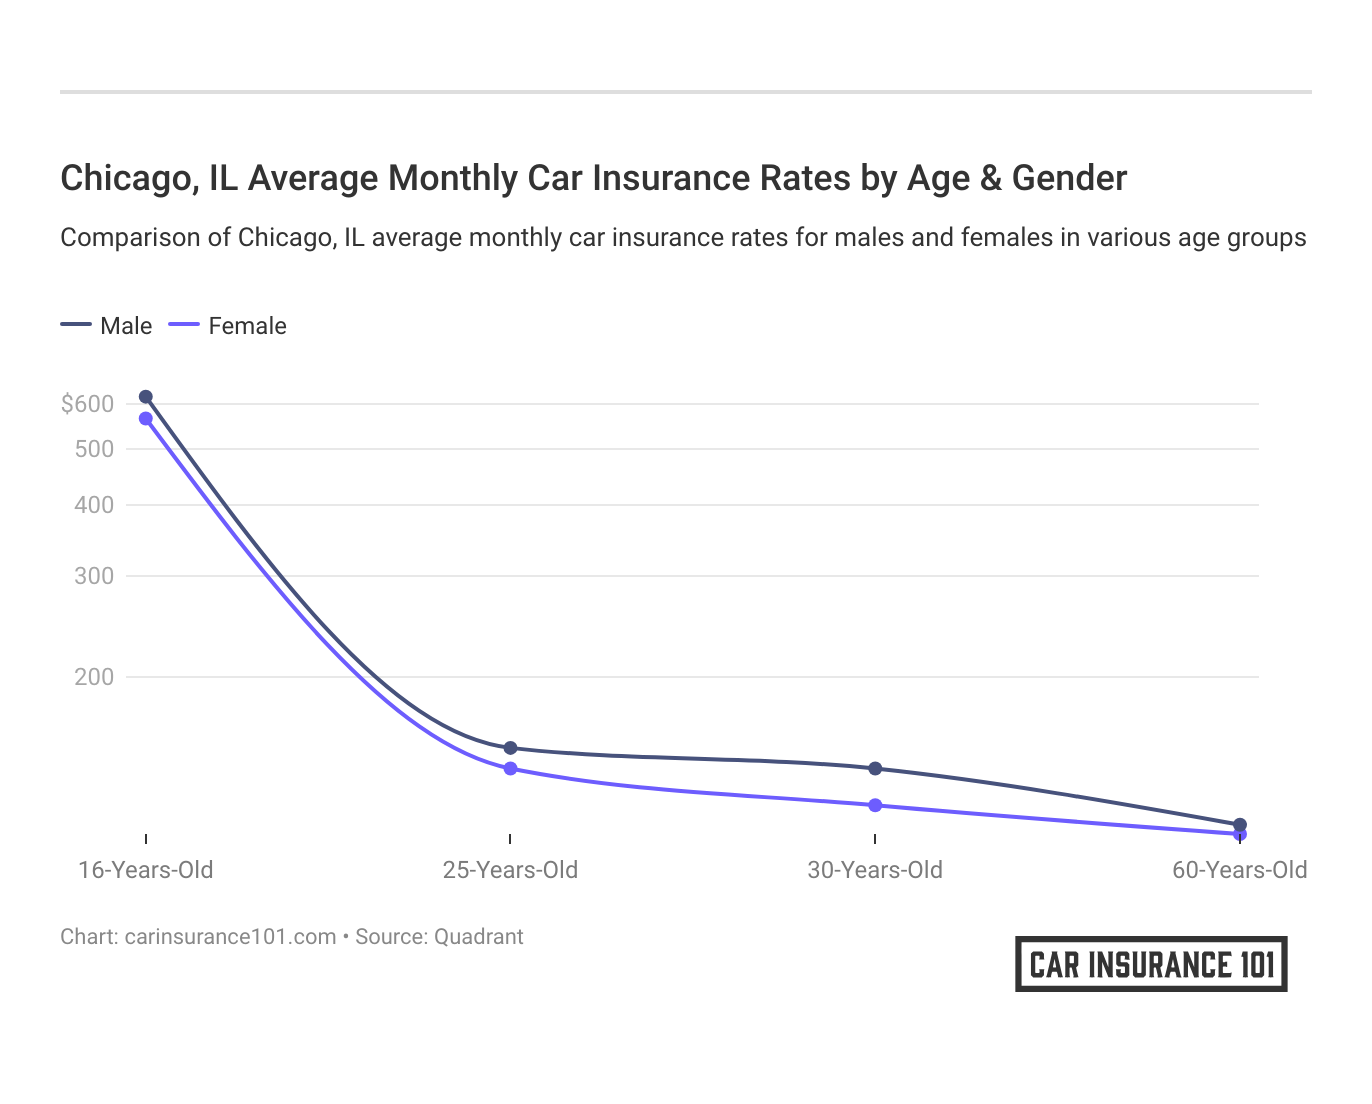 <h3>Chicago, IL Average Monthly Car Insurance Rates by Age & Gender</h3>